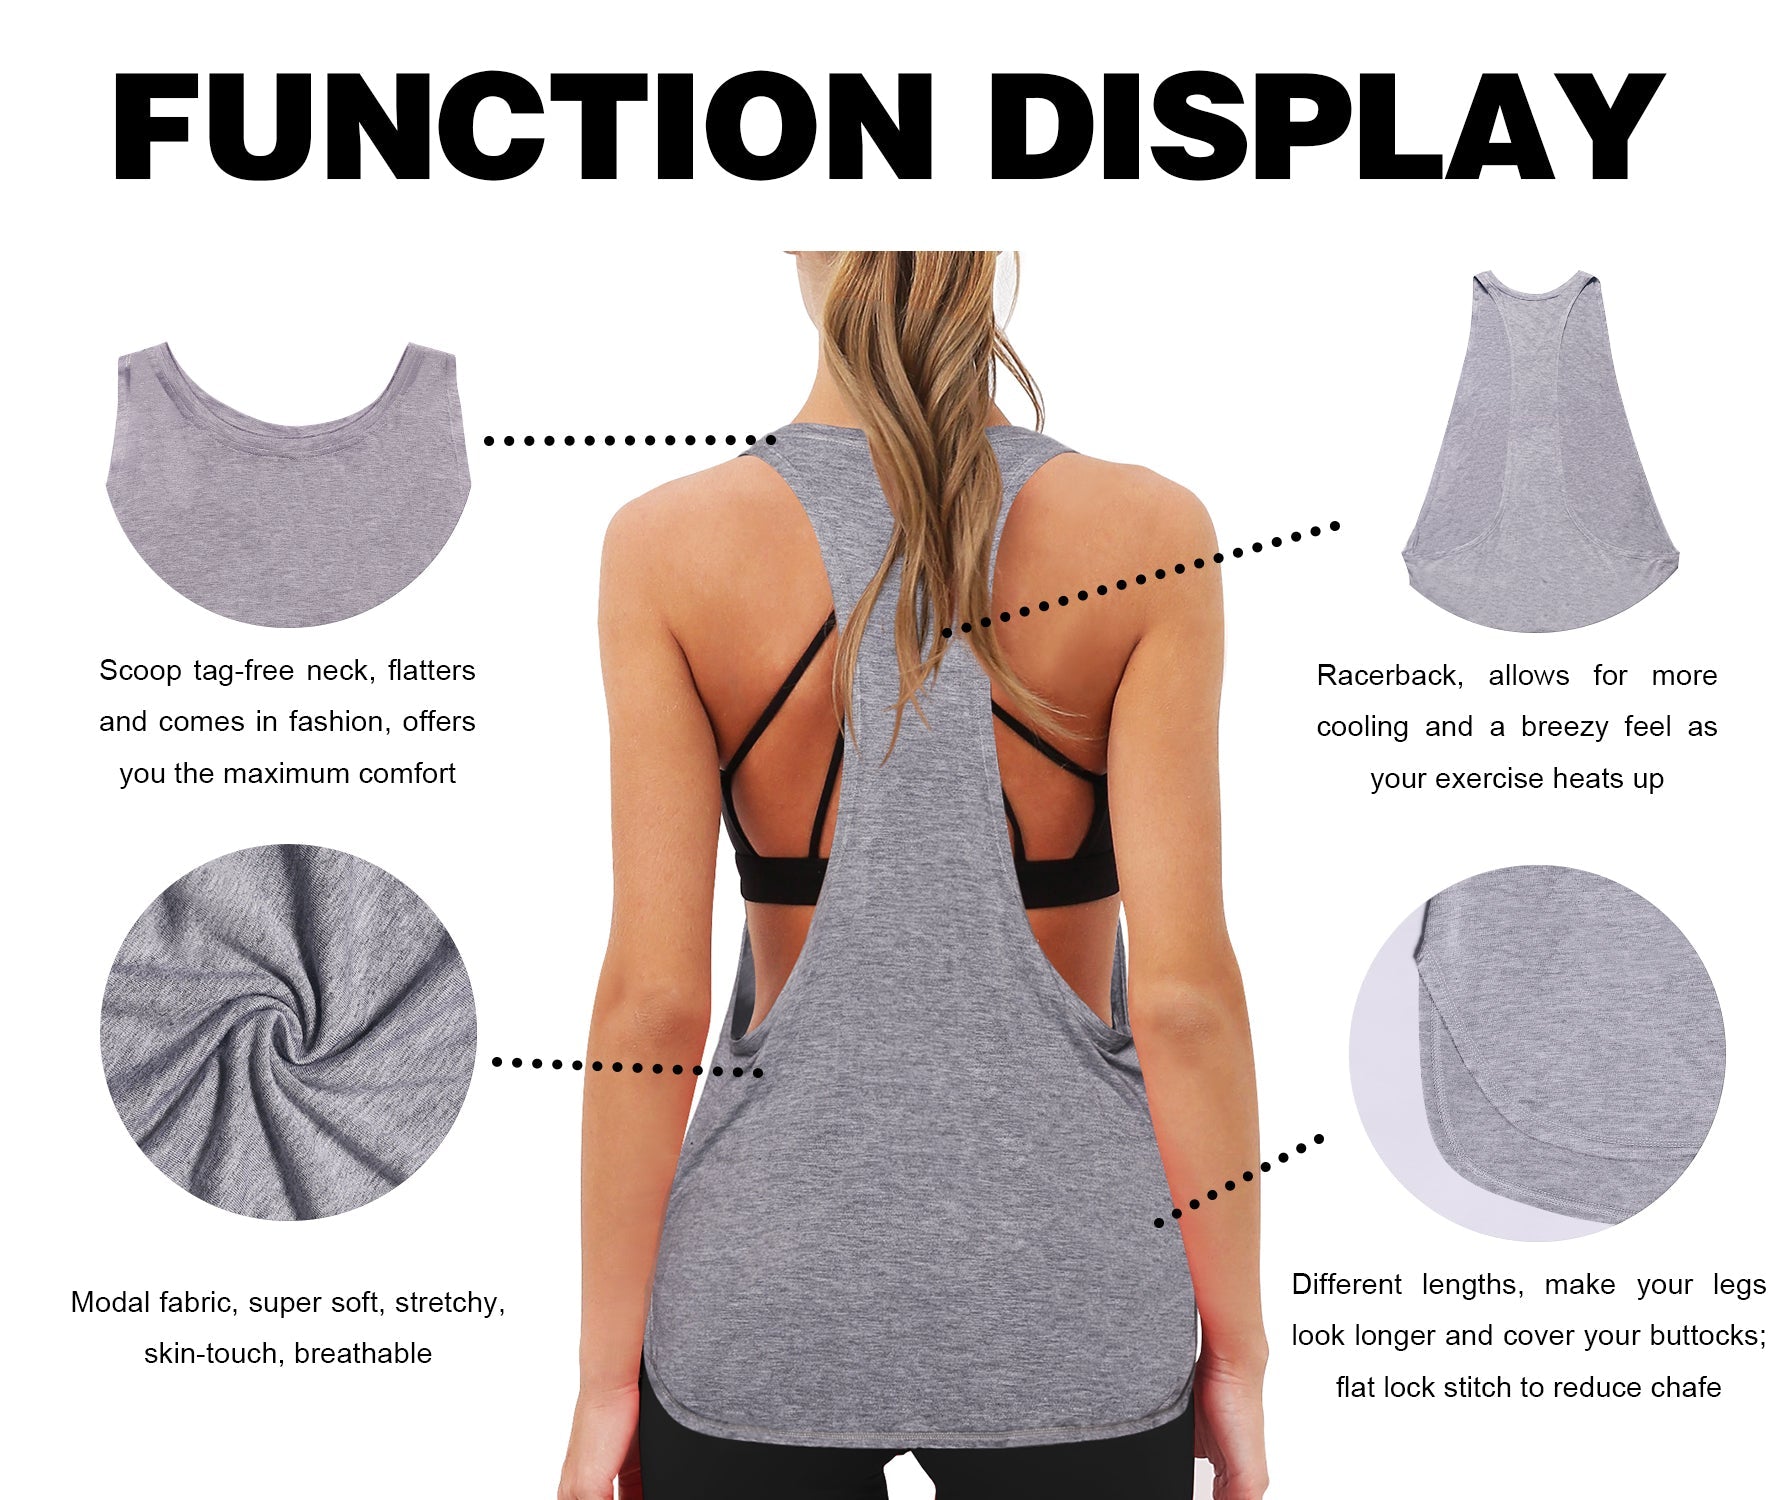 Low Cut Loose Fit Tank Top heathergray Designed for On the Move Loose fit 93%Modal/7%Spandex Four-way stretch Naturally breathable Super-Soft, Modal Fabric